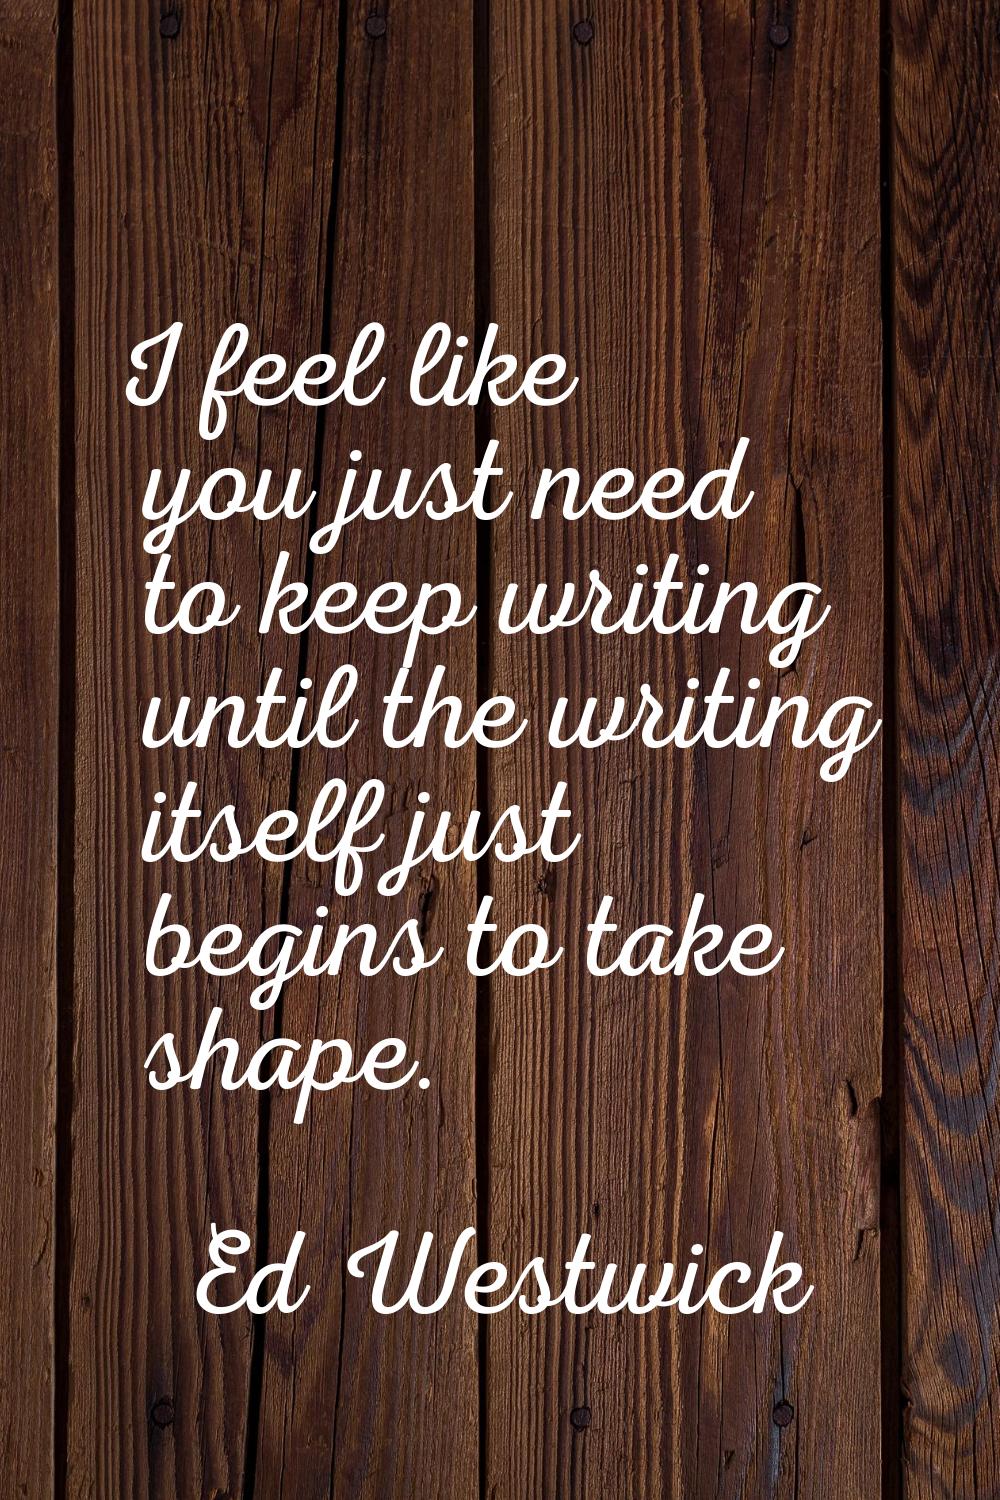 I feel like you just need to keep writing until the writing itself just begins to take shape.